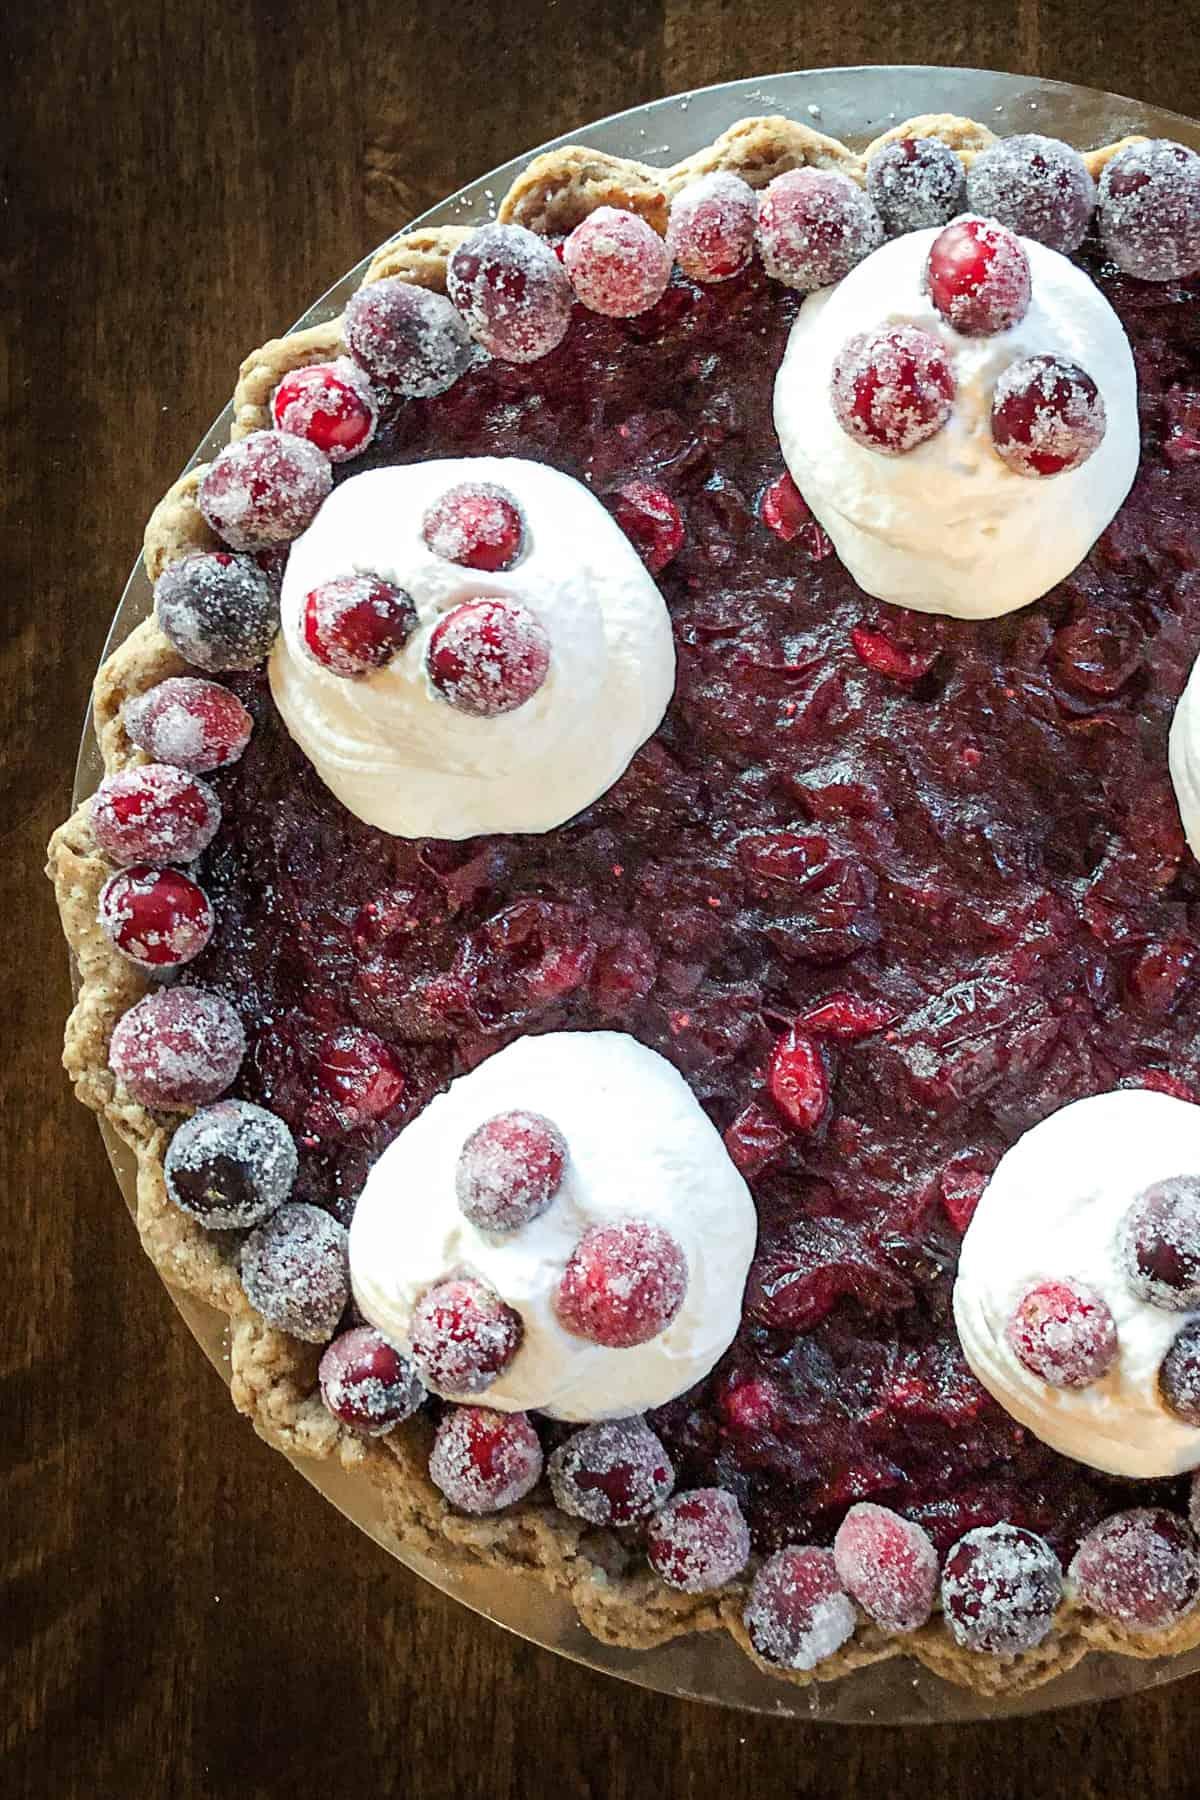 Cranberry vanilla custard pie with whipped cream and candied cranberries.